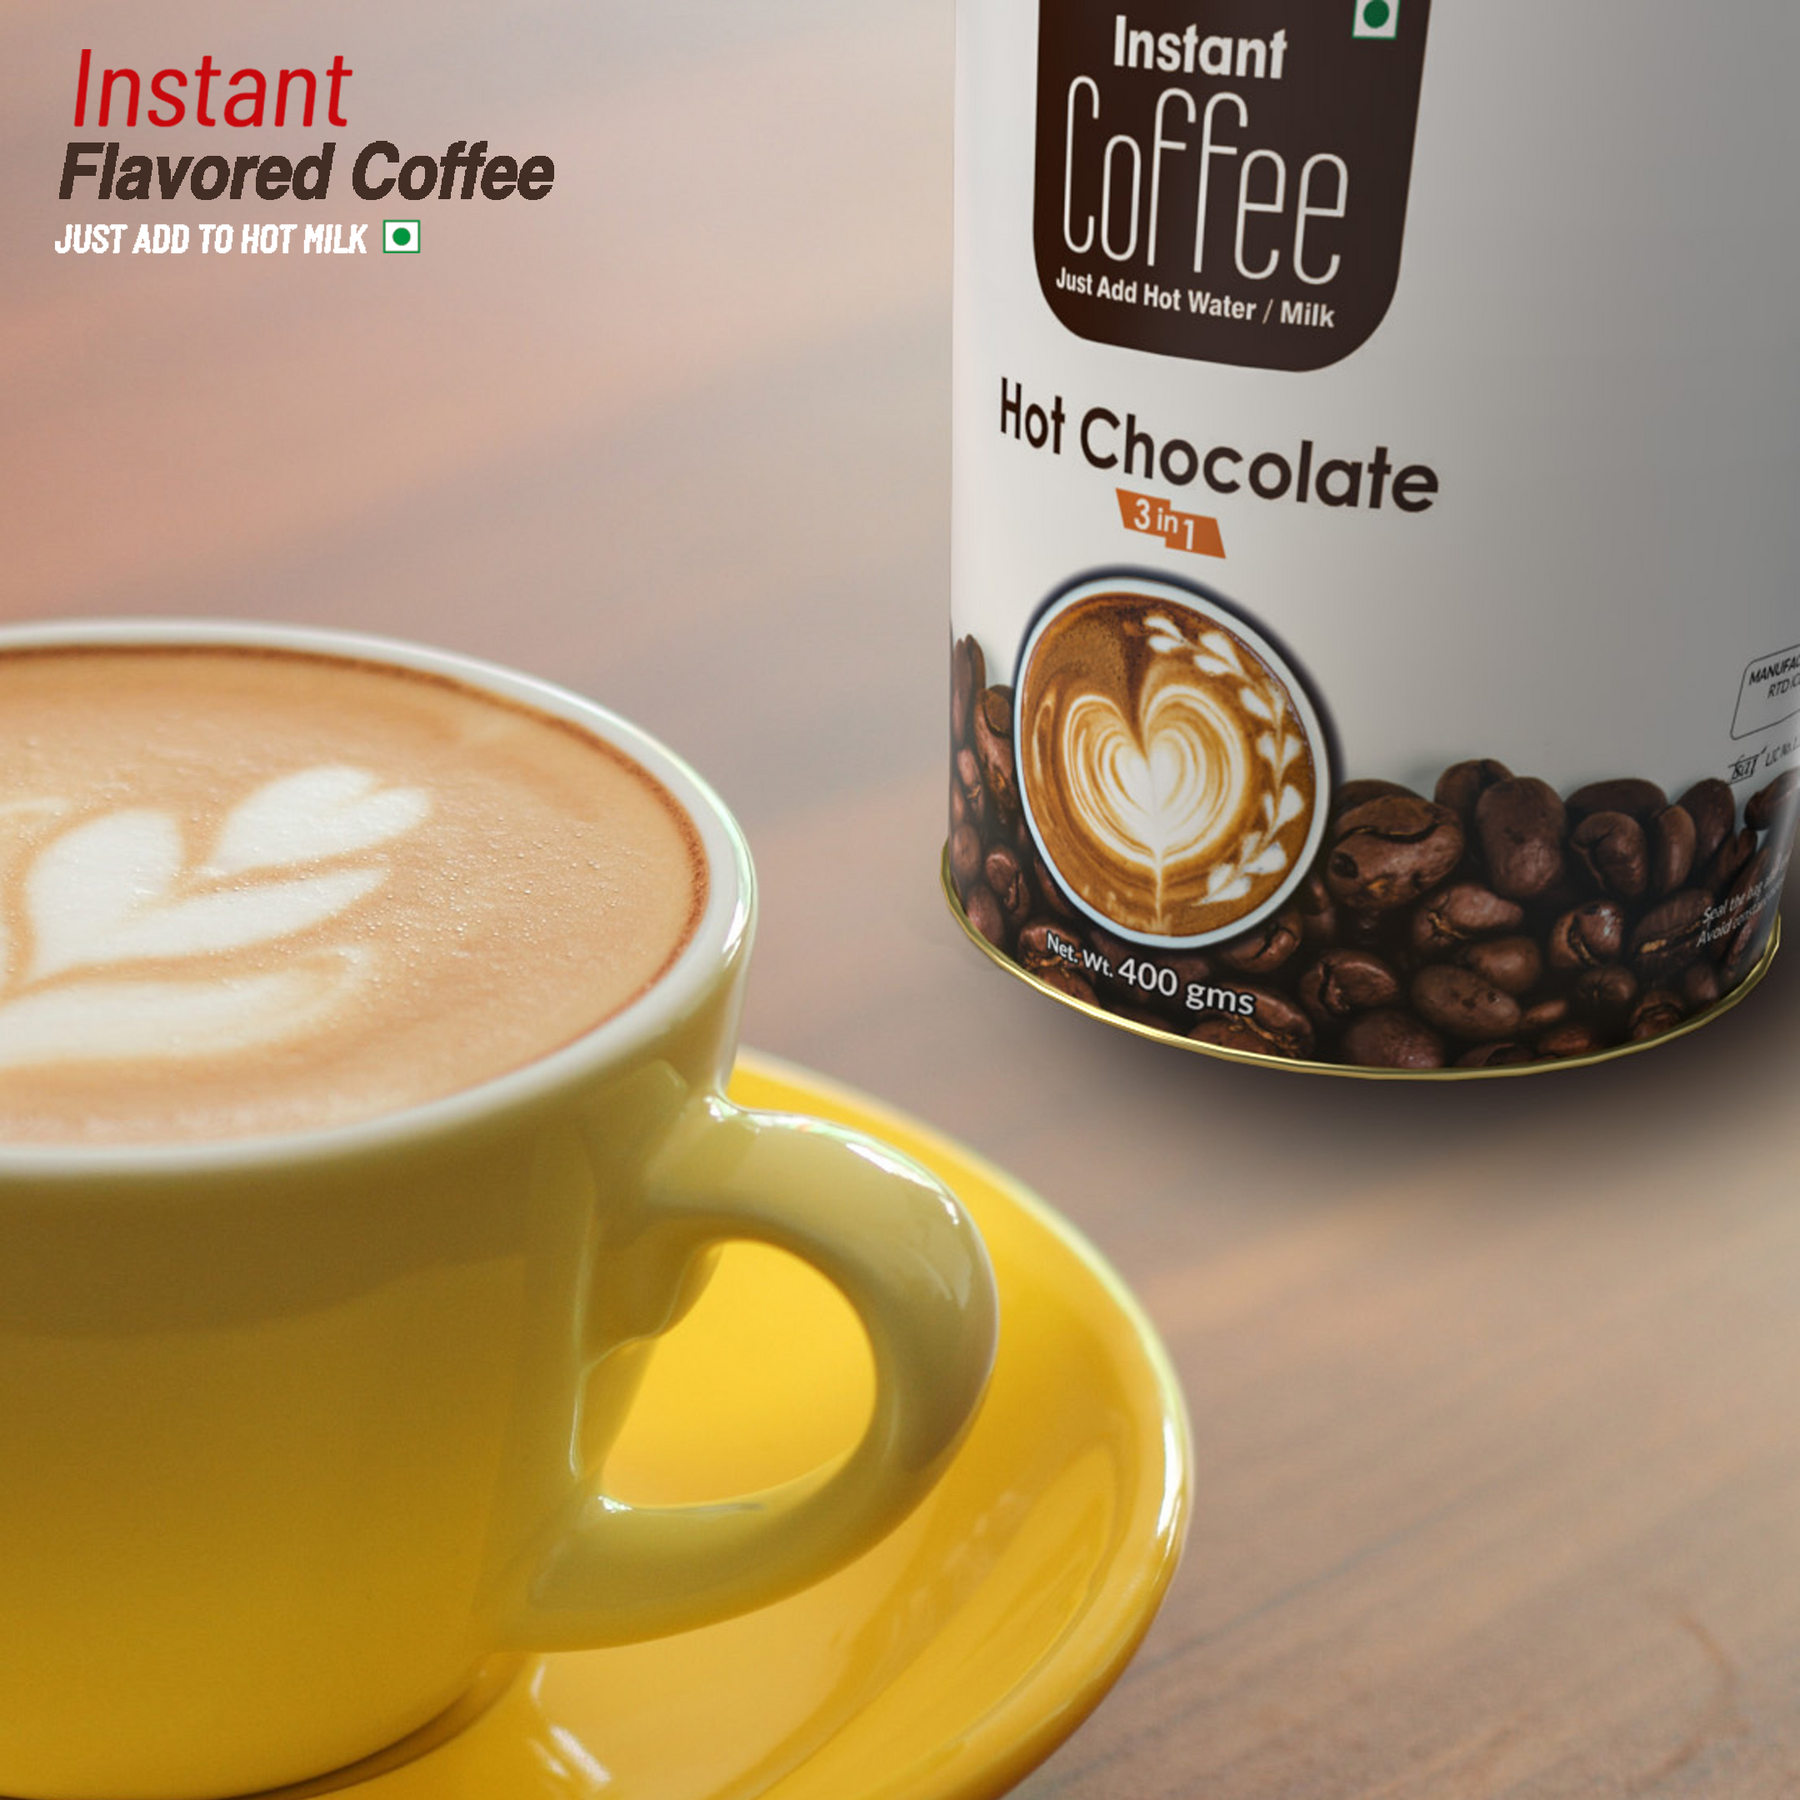 Hot Chocolate Instant Coffee Premix (3 in 1)